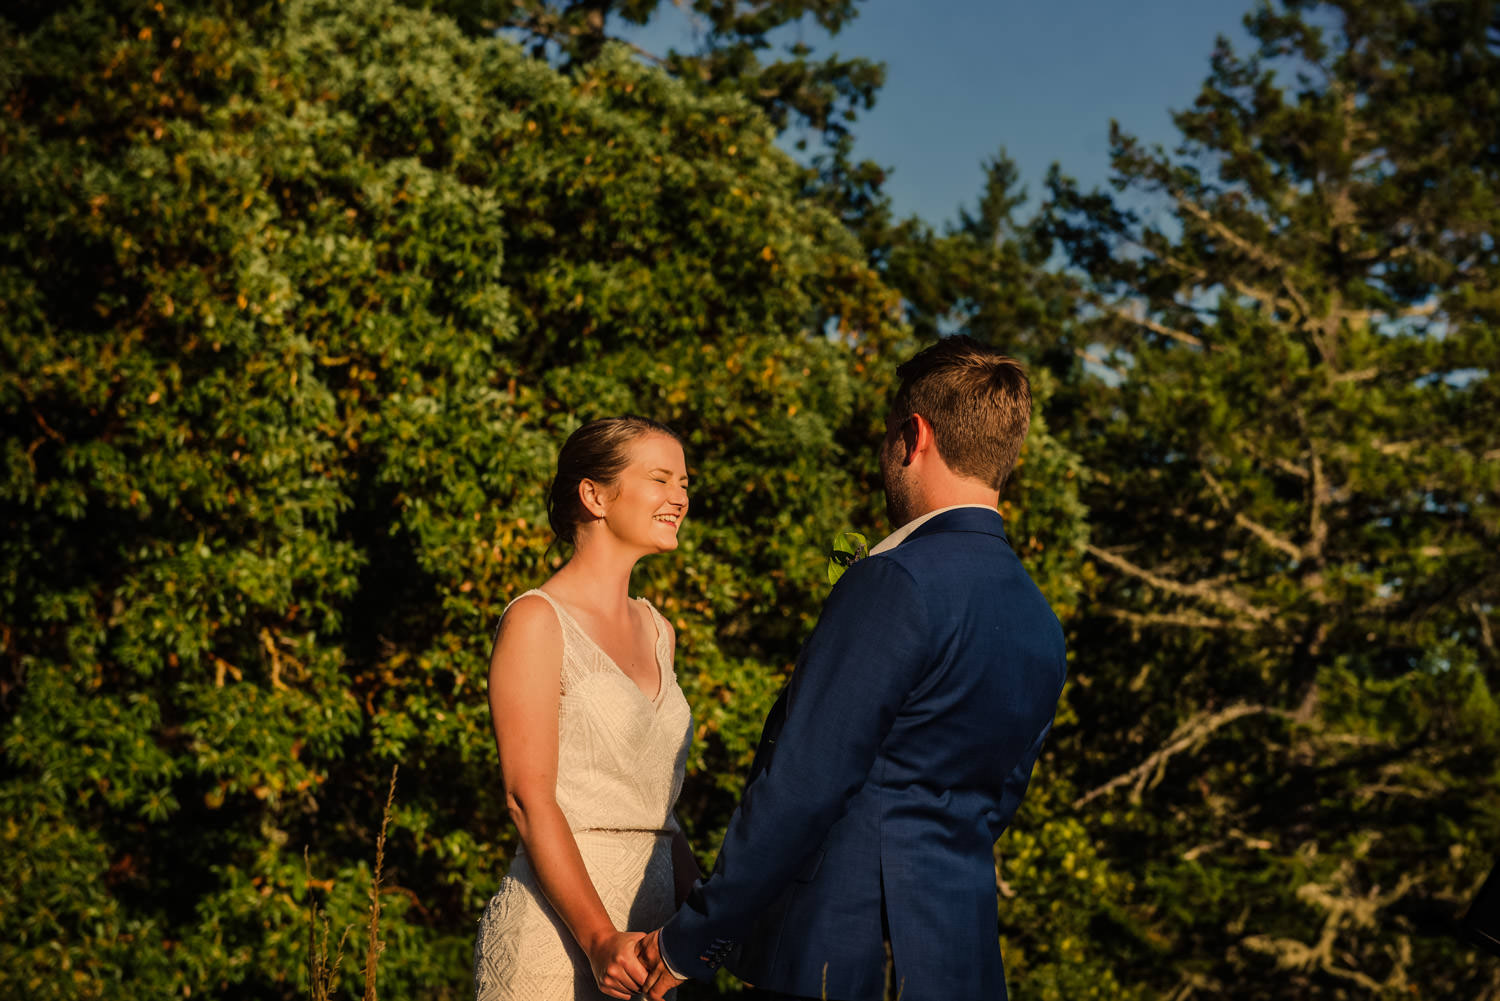 Scafe Hill wedding photojournalism at Thetis Lake Regional park in Victoria BC